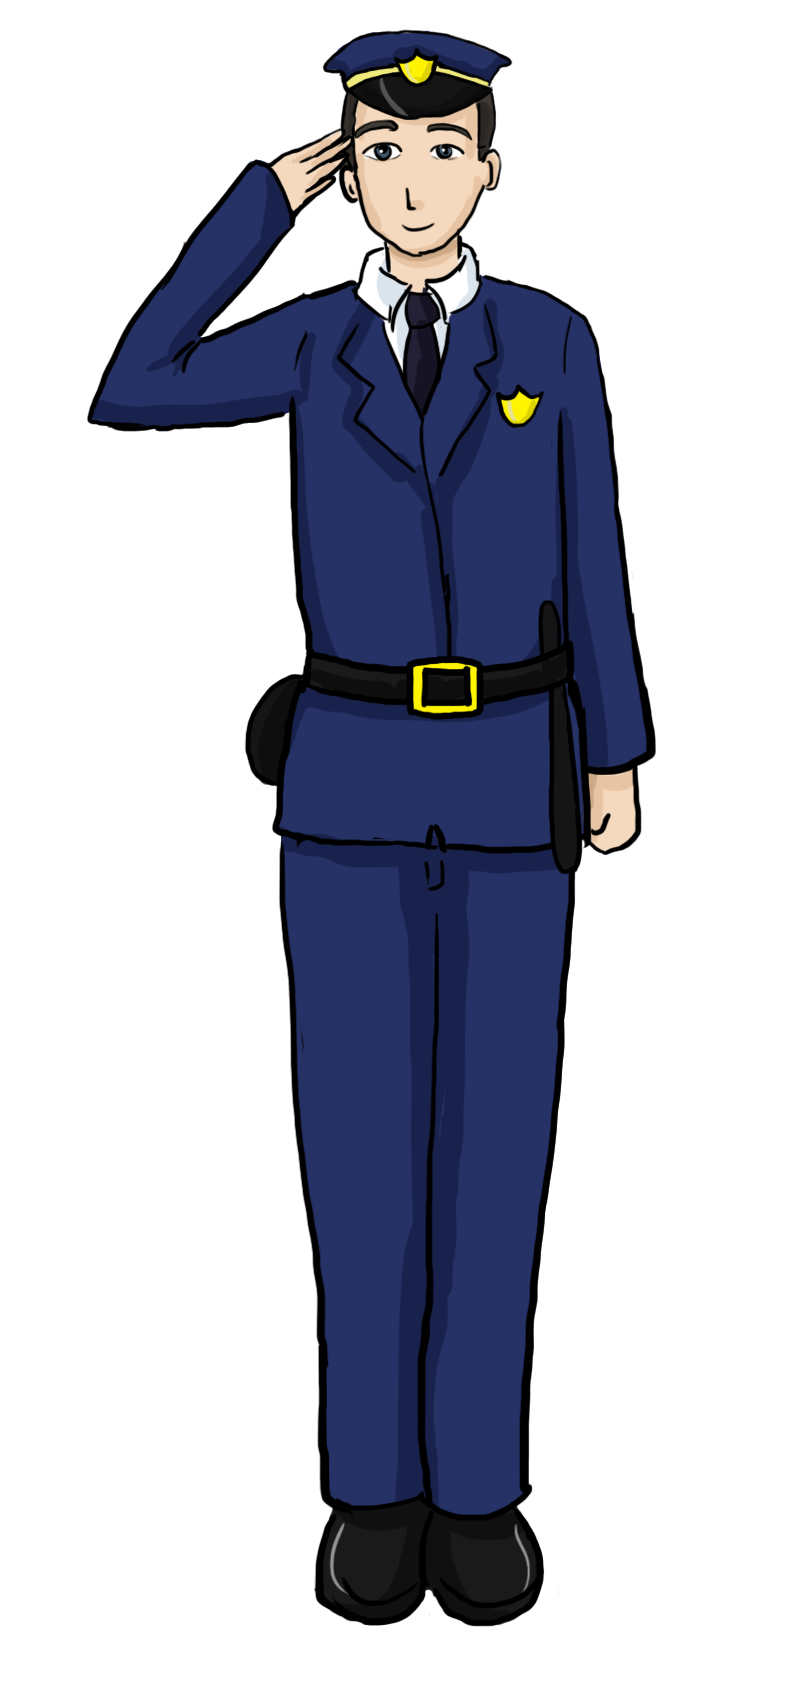 Free Policeman Clip Art - Police Images Clip Art